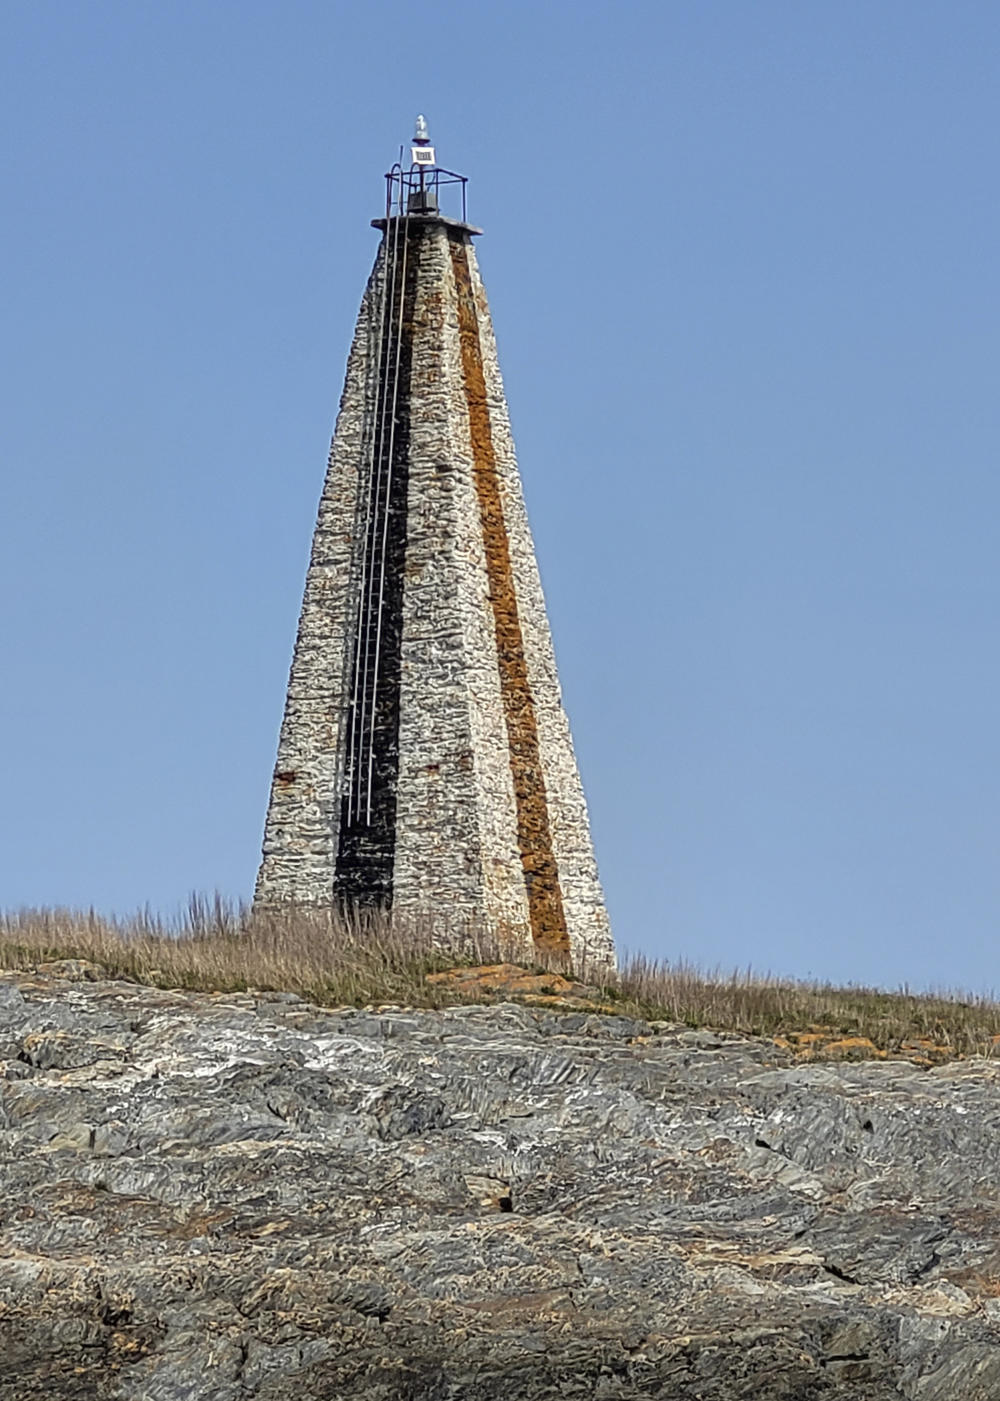 Little Mark Island and Monument stands between Broad Sound and Casco Bay, off the coast of Harpswell, Maine.